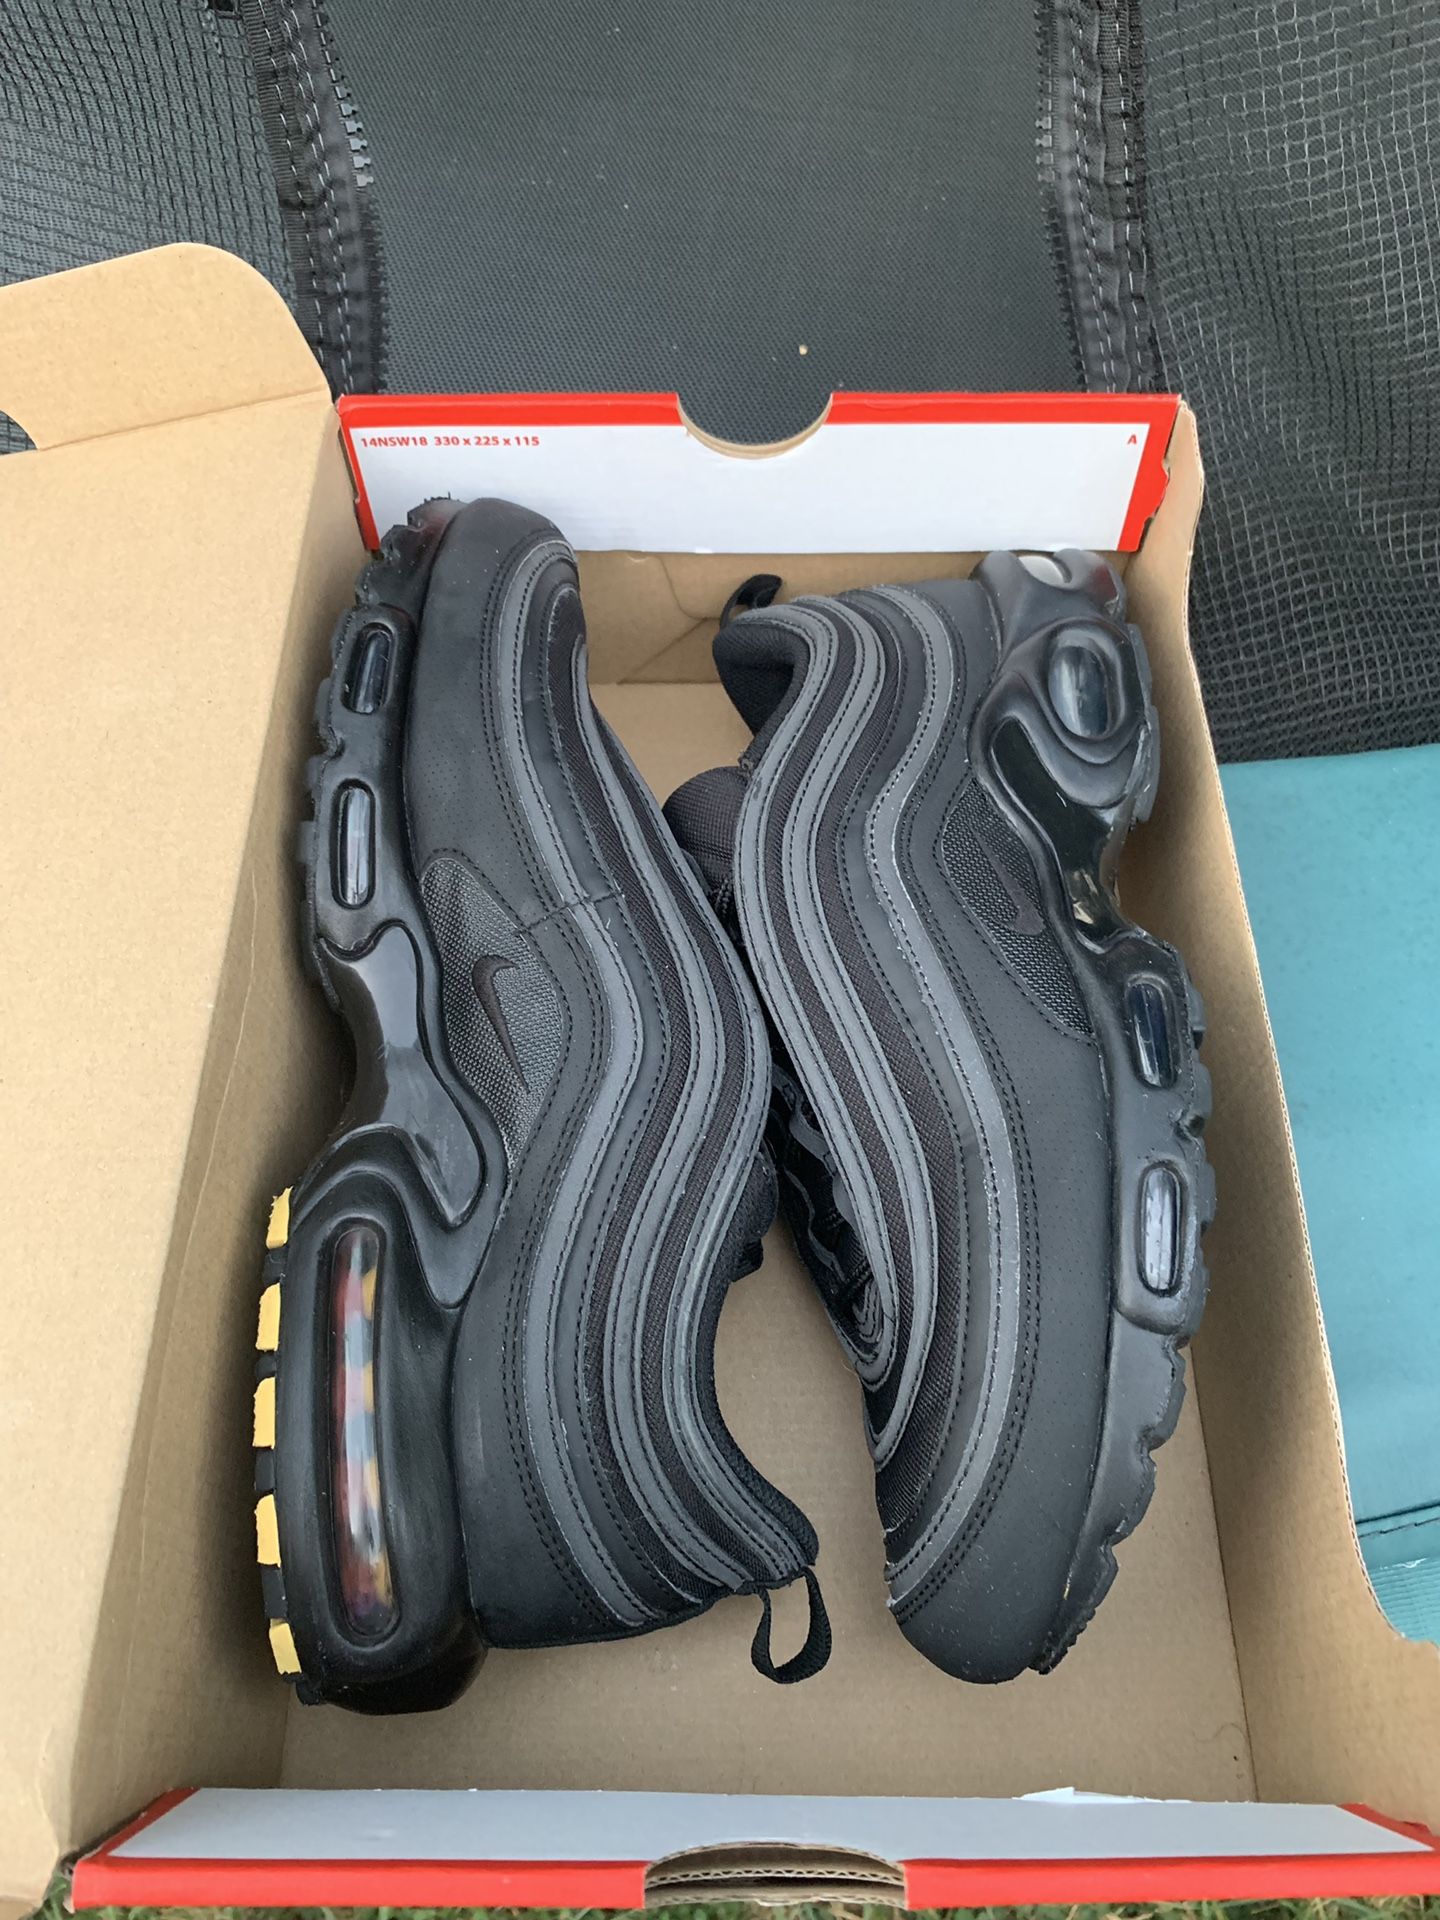 Air max plus/97 size 10.5, 130$ ,9/10 condition, the reflective is amazing and the shoe is a classic